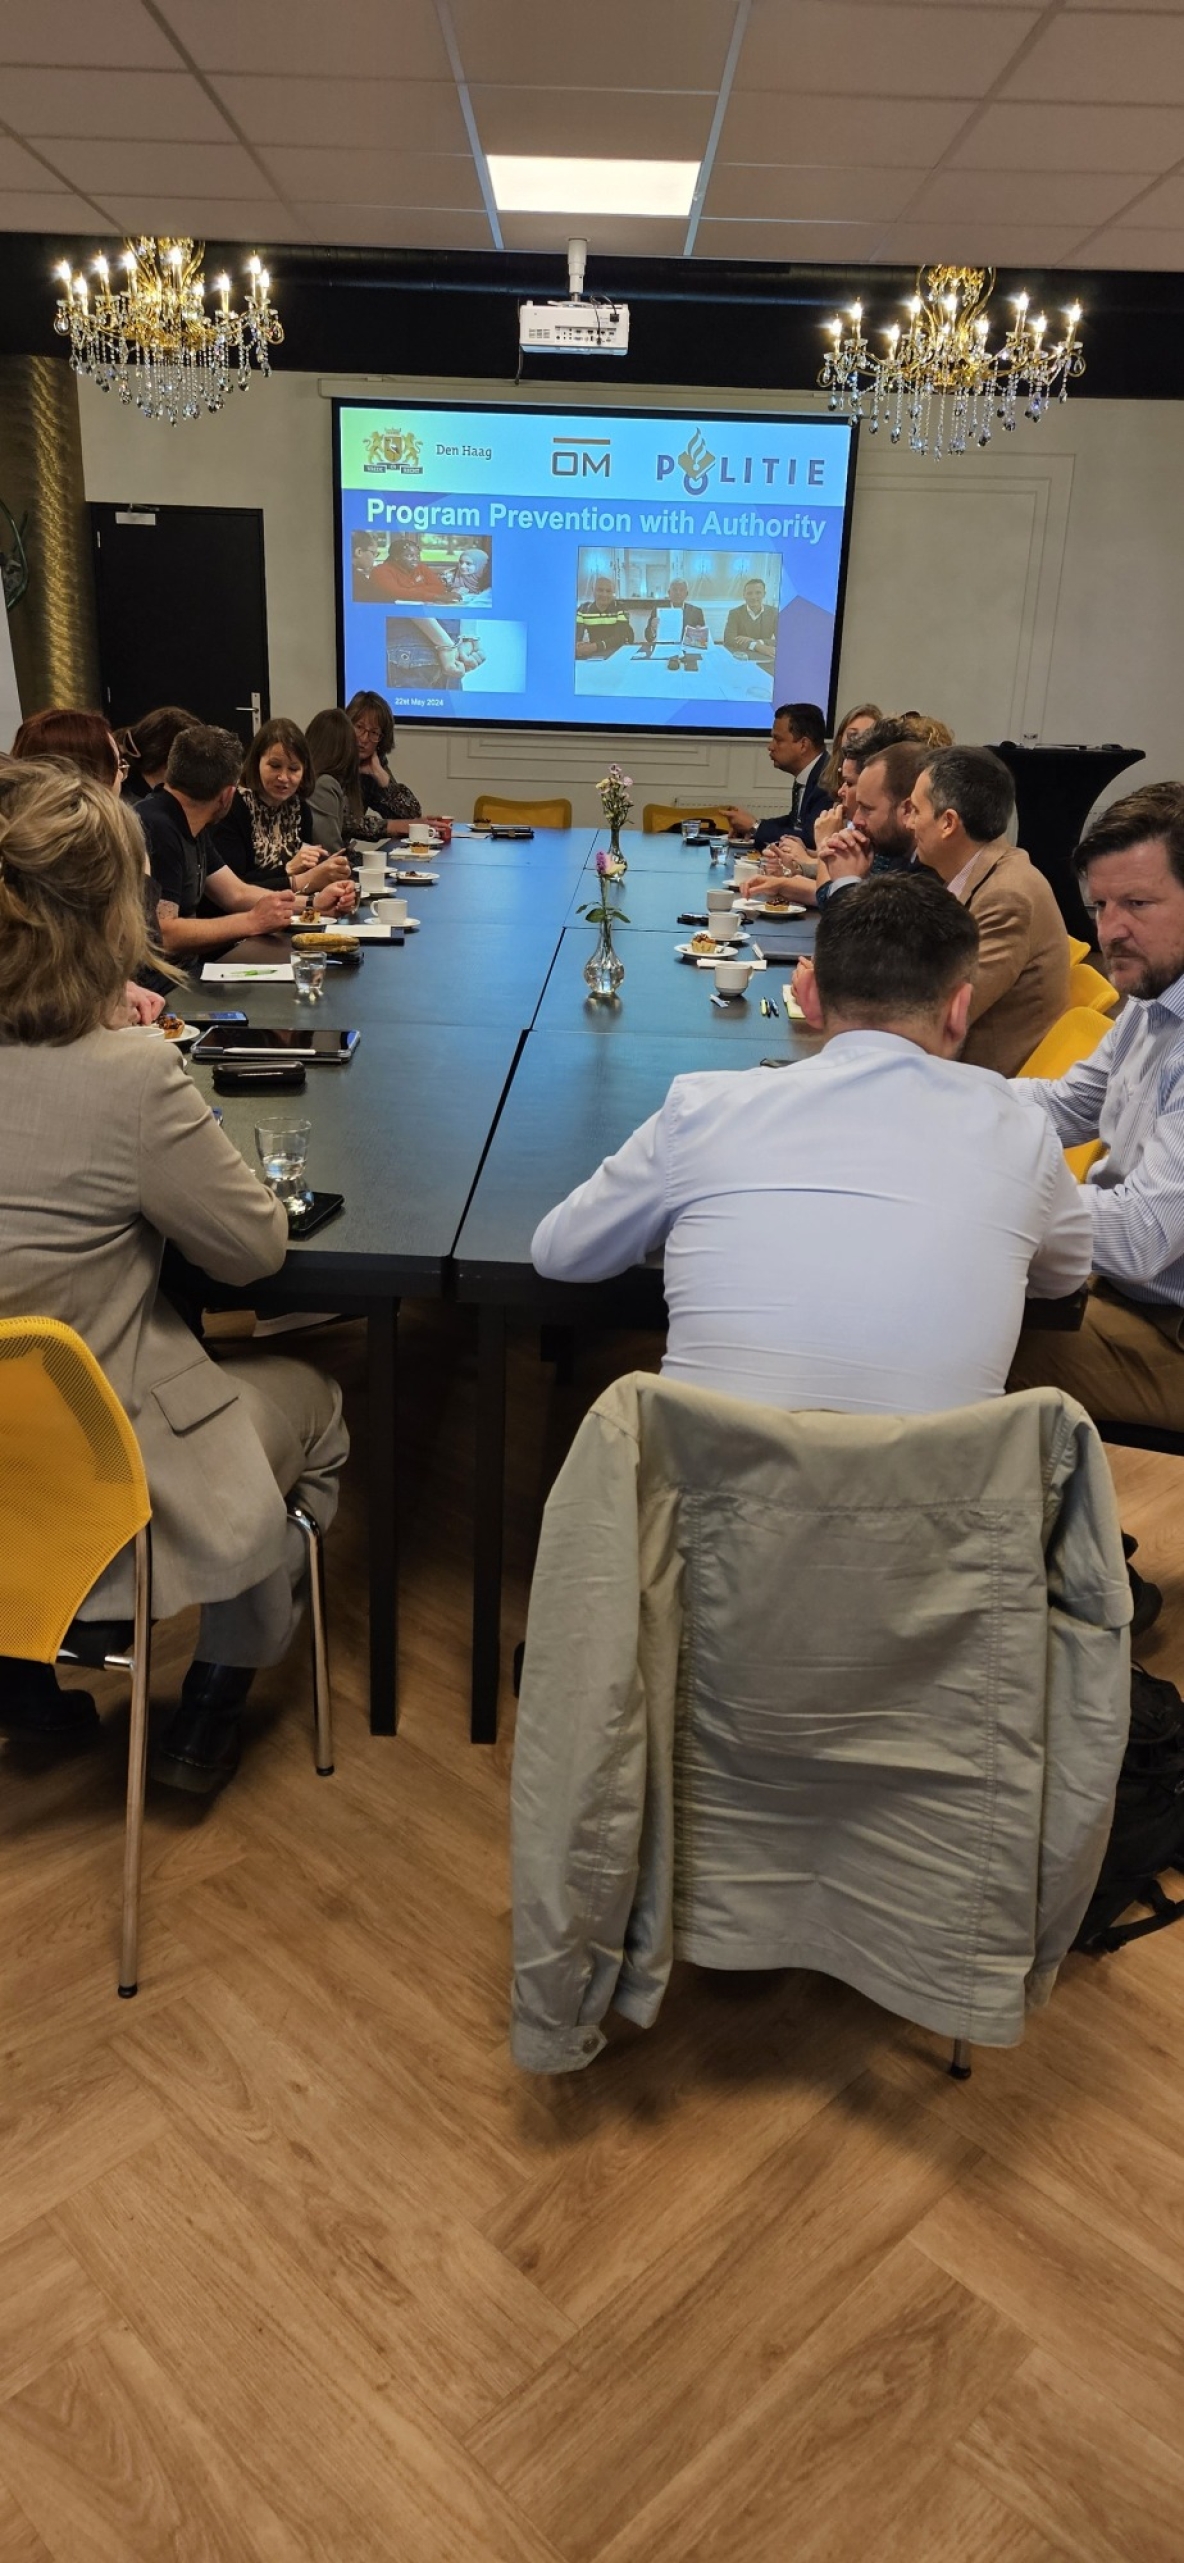 Greentown Team visit the Ministry for Justice and Security in the Hague for a knowledge exchange about effective programmes for children involved in organised crime networks